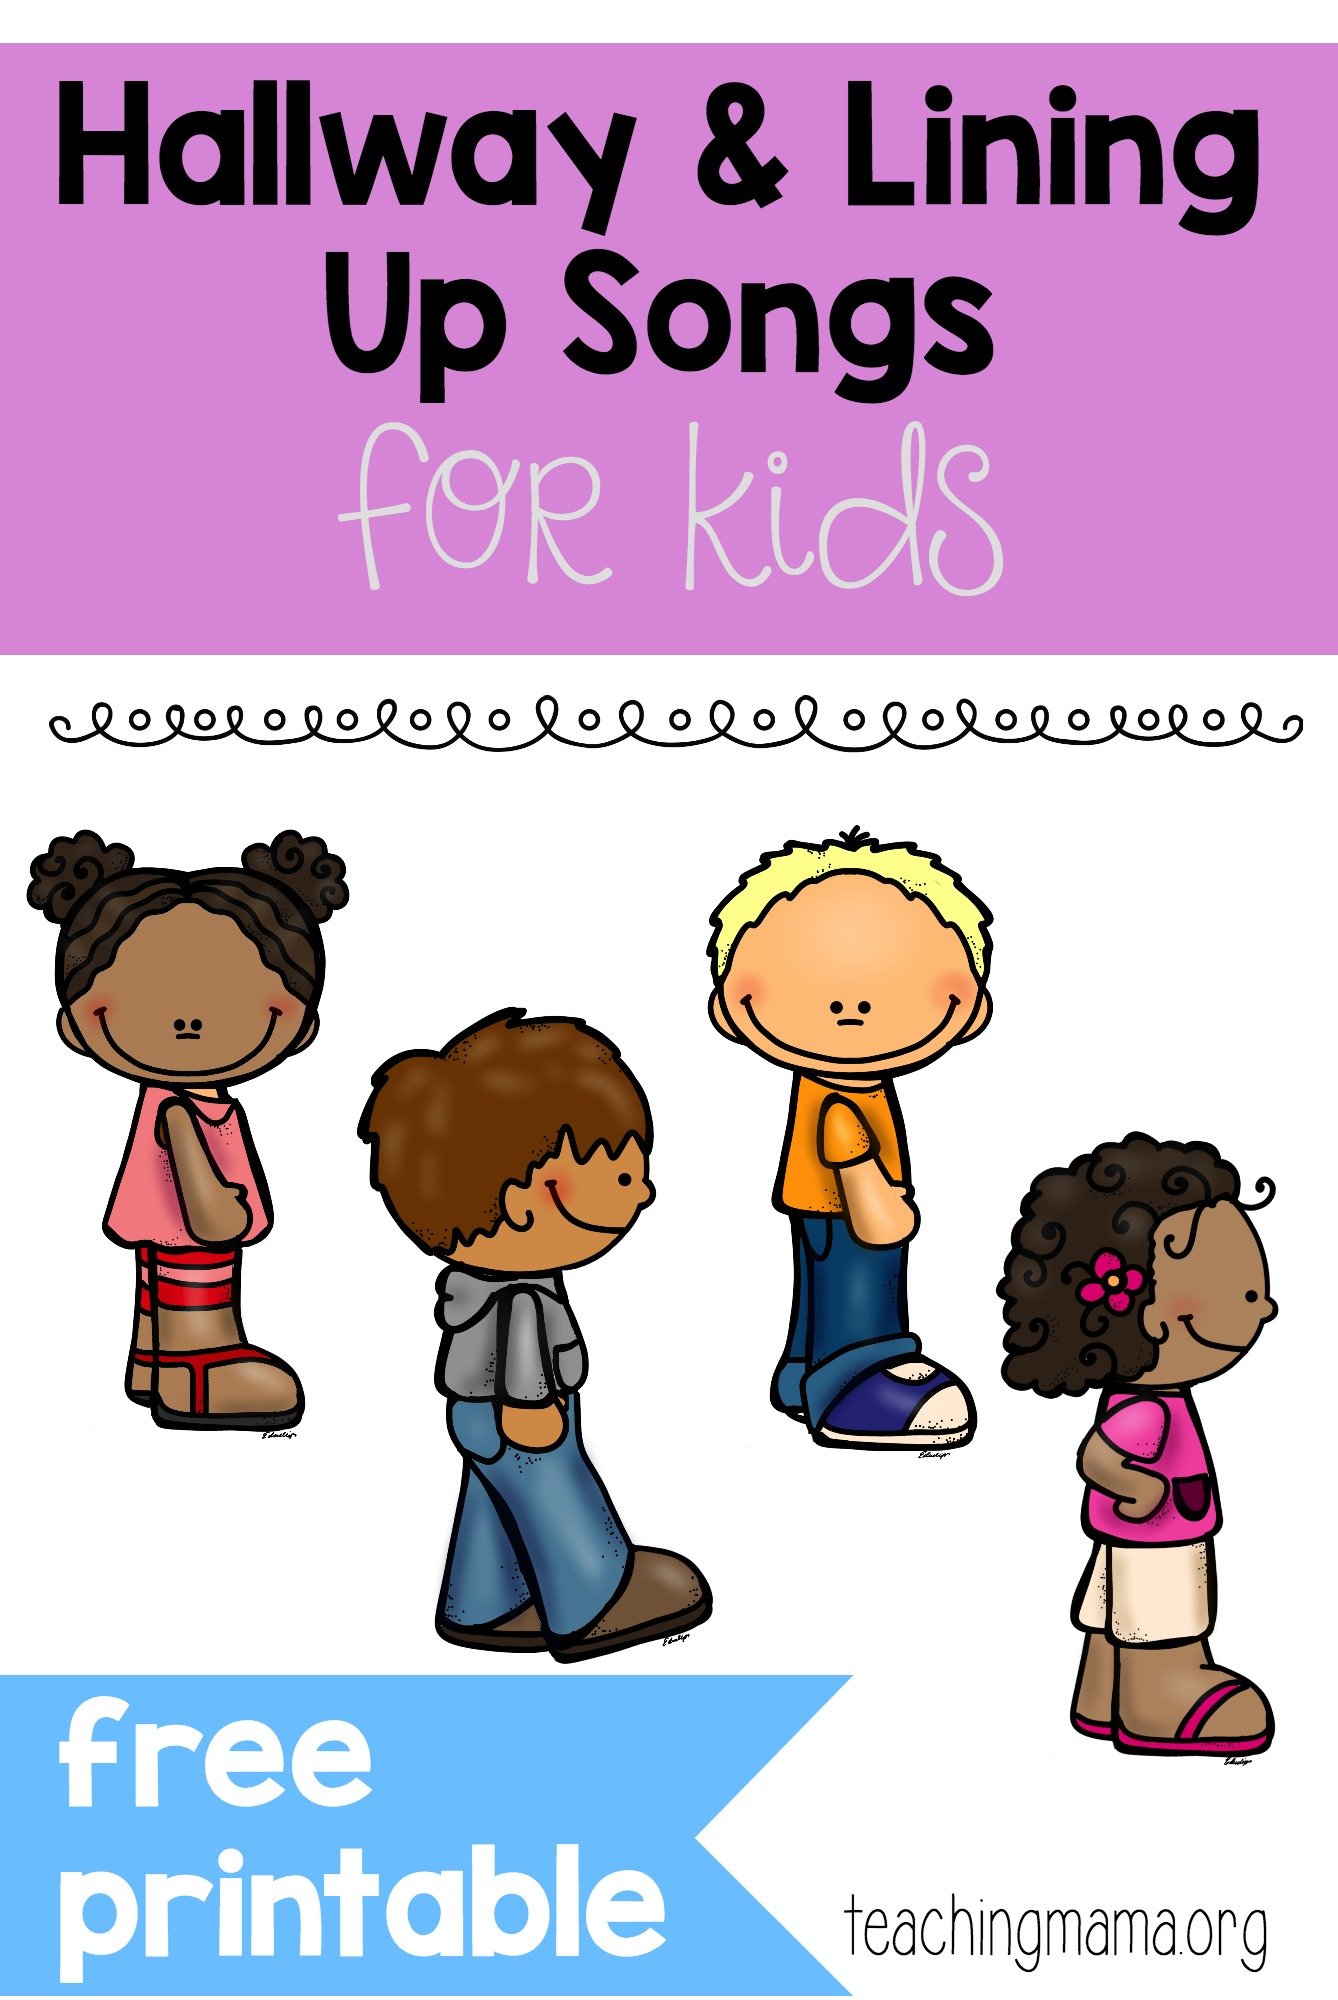 Hallway & Lining Up Songs for Kids